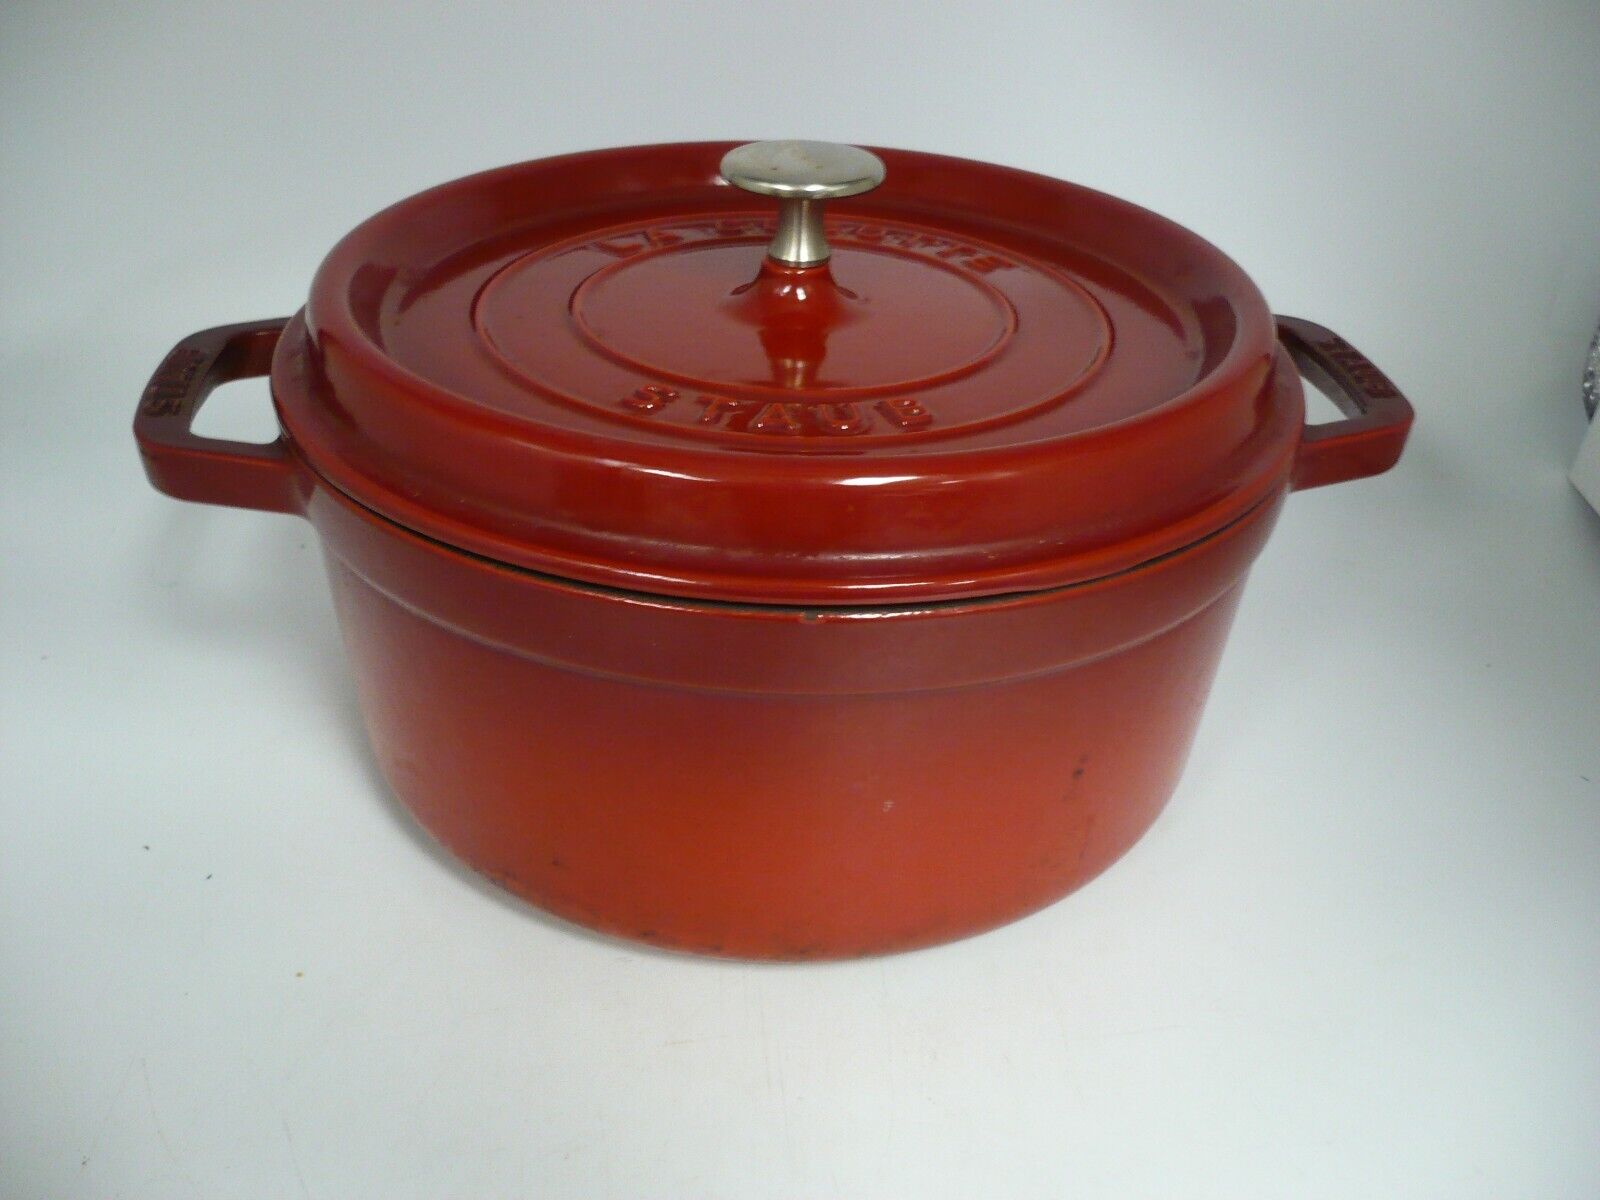 Straub LA Cocotte Cast Iron and Enamel Dutch Oven/Stockpot - Made in France